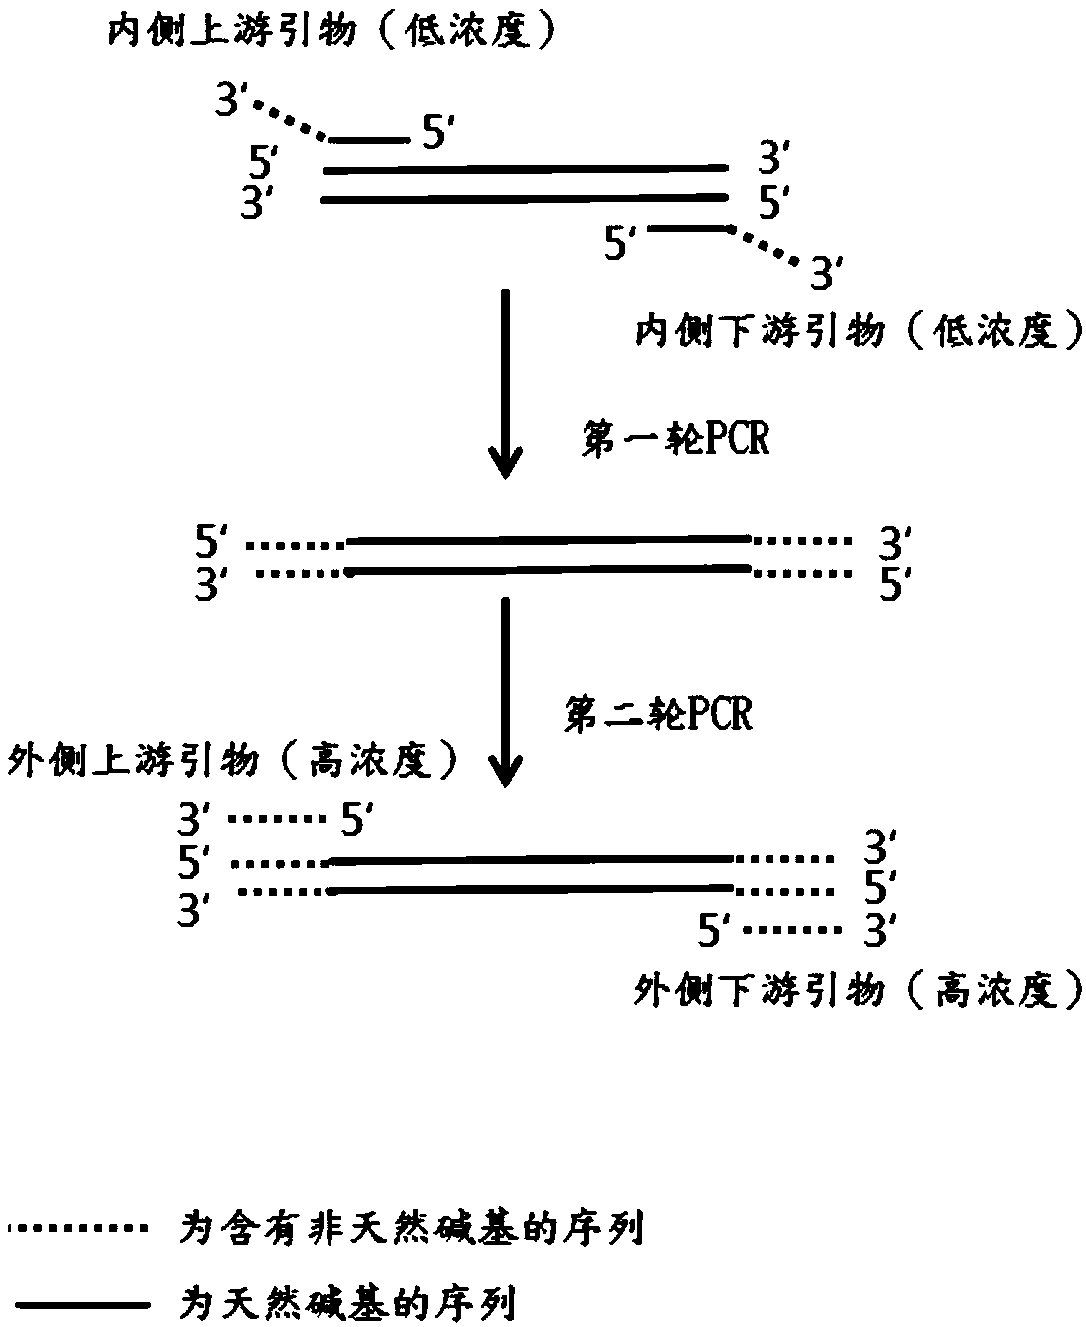 Method for enriching DNA target regions by synergistic PCR method based on artificial nucleic acid analogue technology